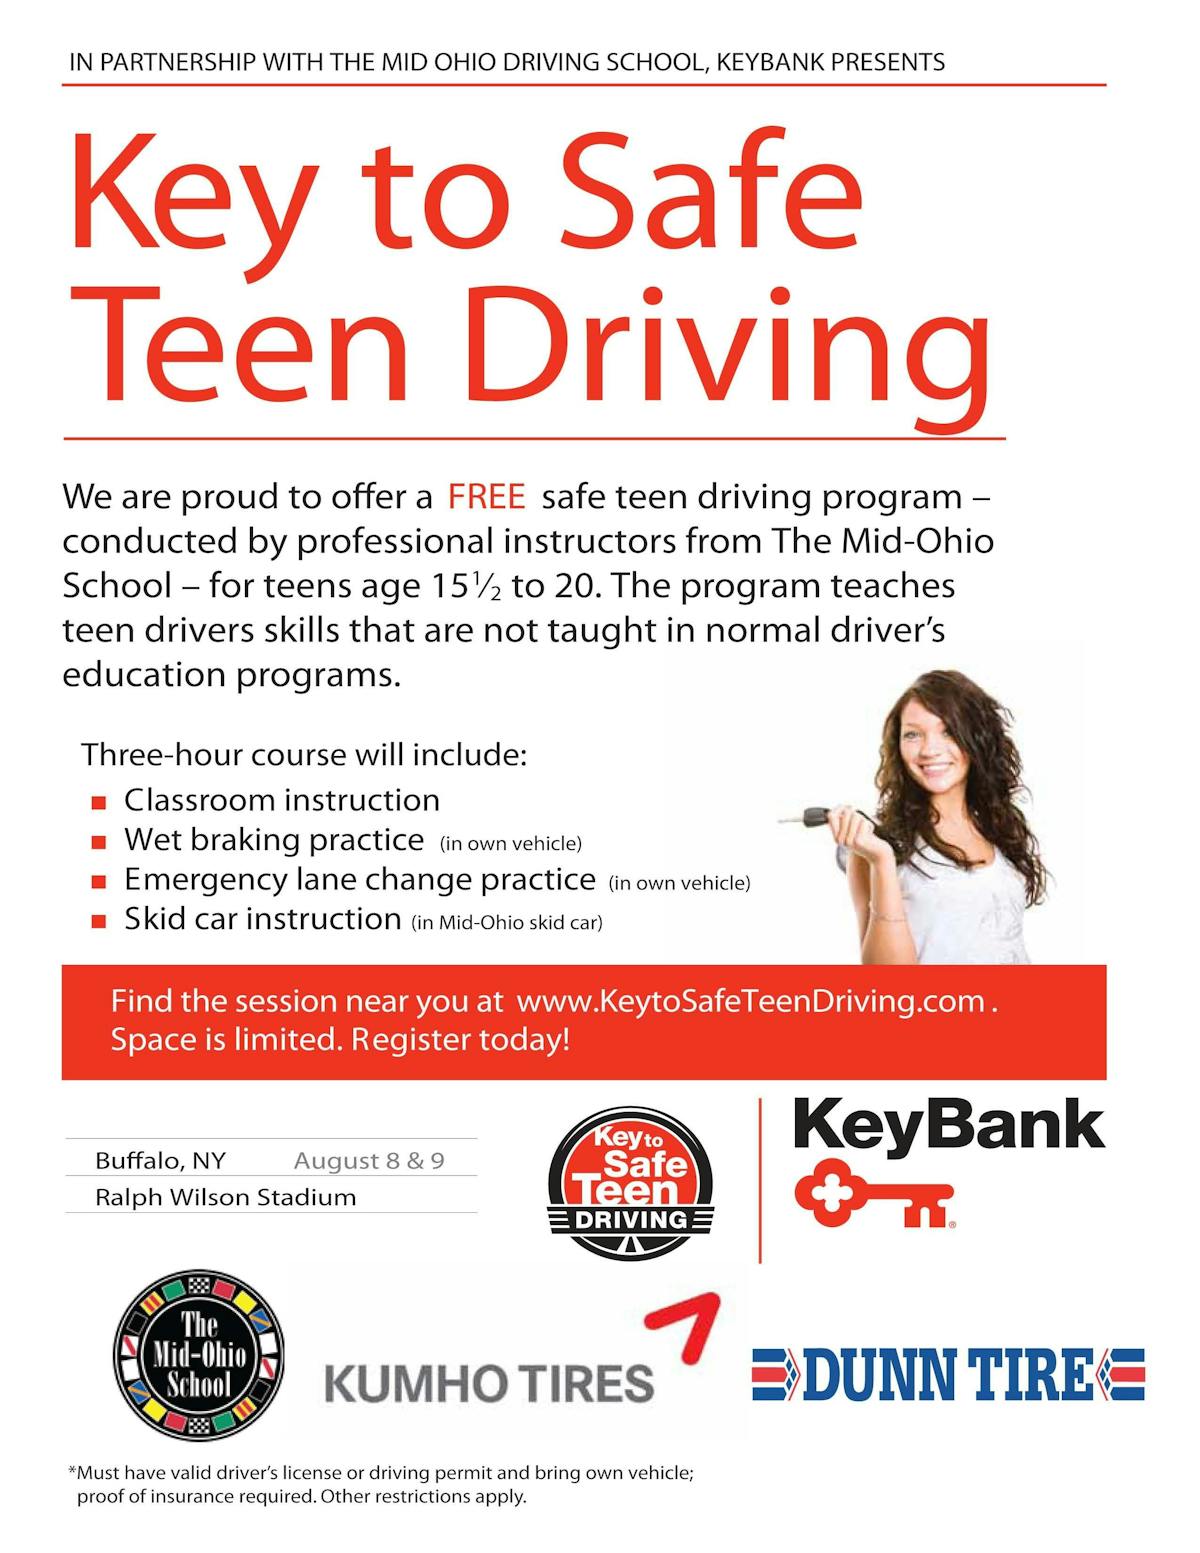 dunn-tire-gets-key-help-with-safe-driving-program-for-teens